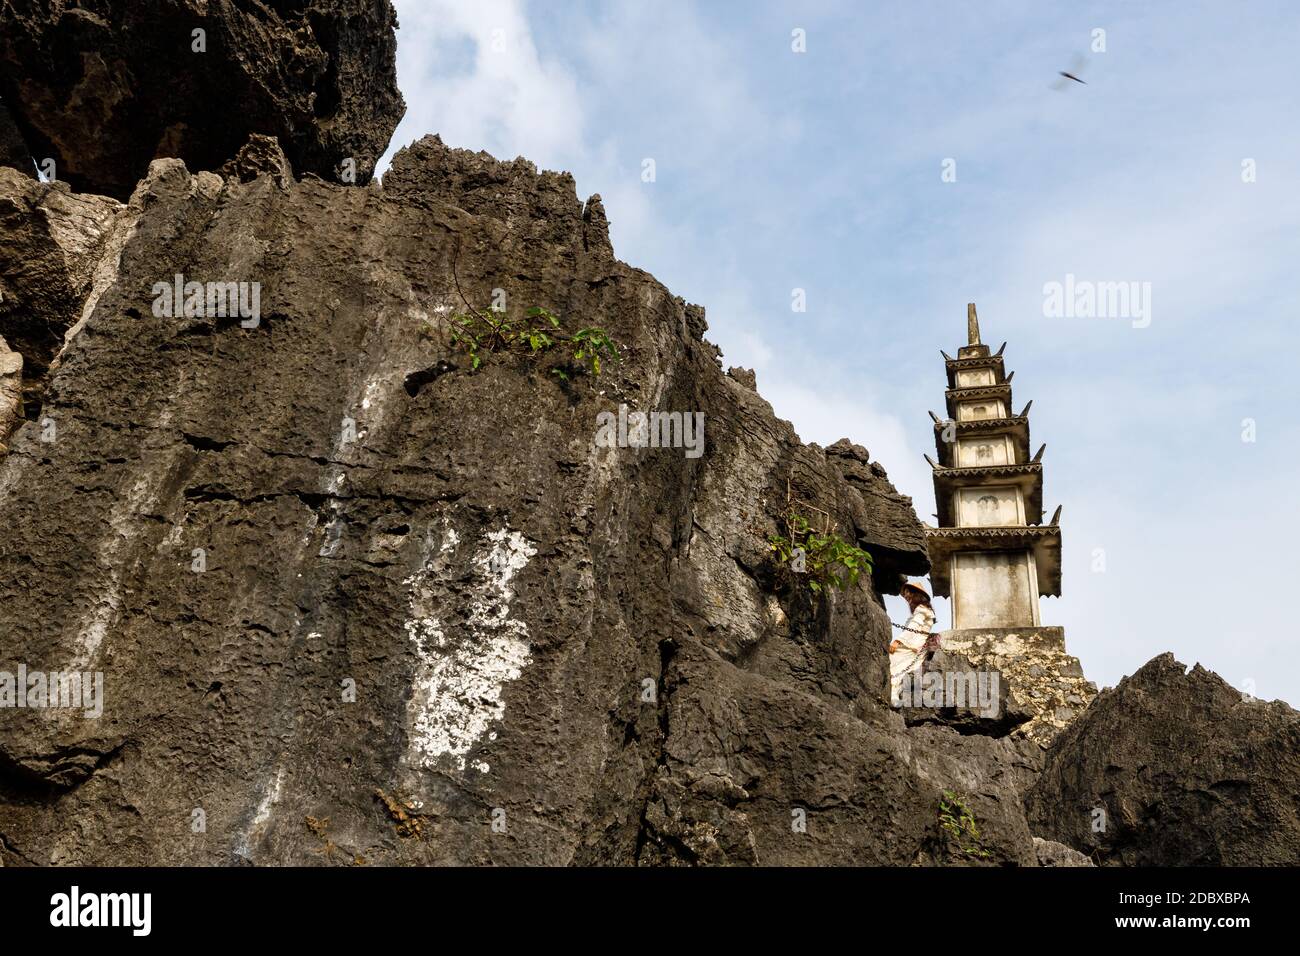 The Landscape of Ninh Binh at Tam Coc and Hang Mua in Vietnam Stock Photo